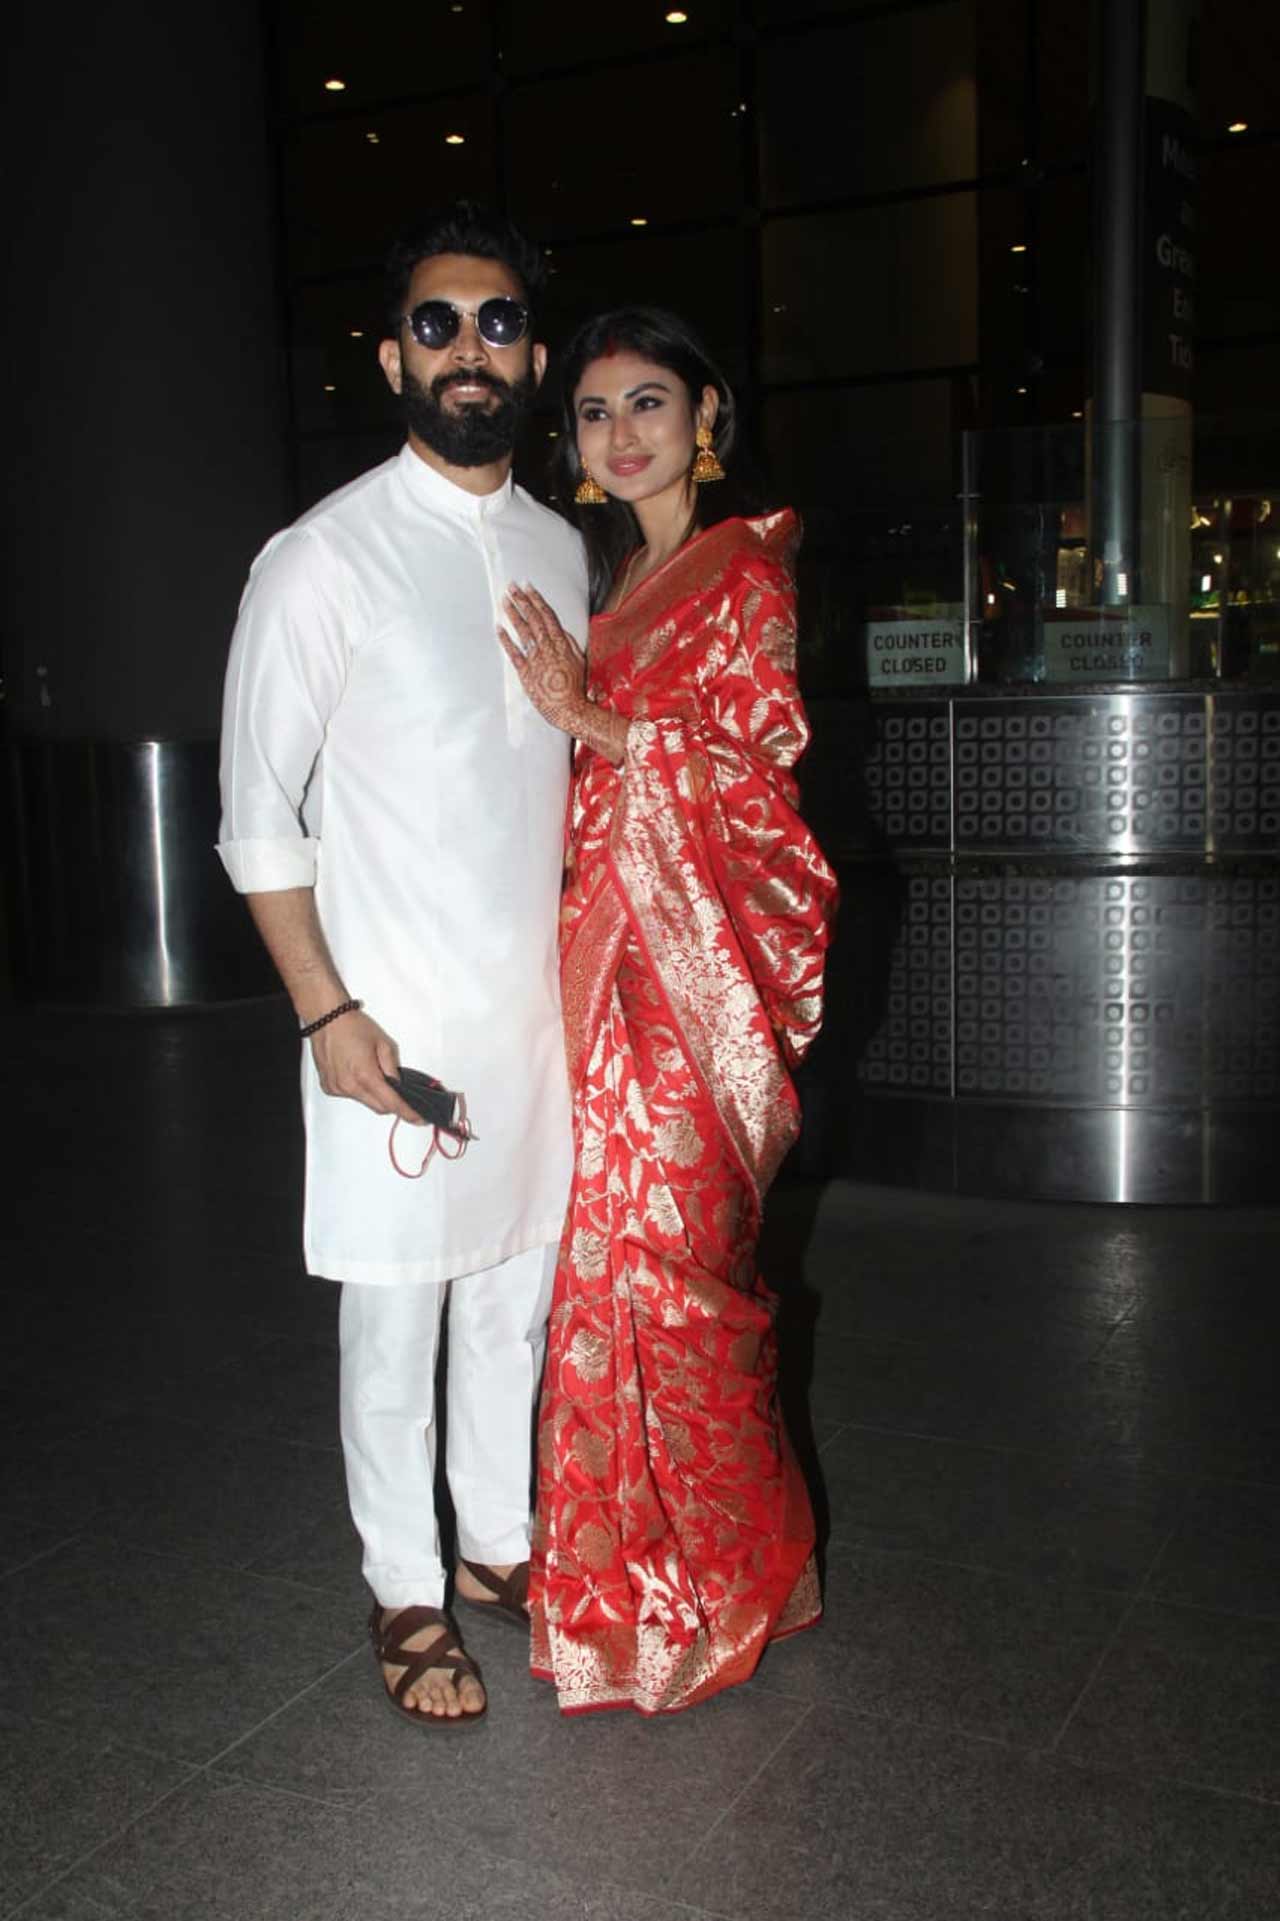 Mouni opted for a red lehenga, whereas Suraj was seen wearing a white sherwani for a Bengali wedding. The actress gave us all a glimpse of her traditional look on social media.